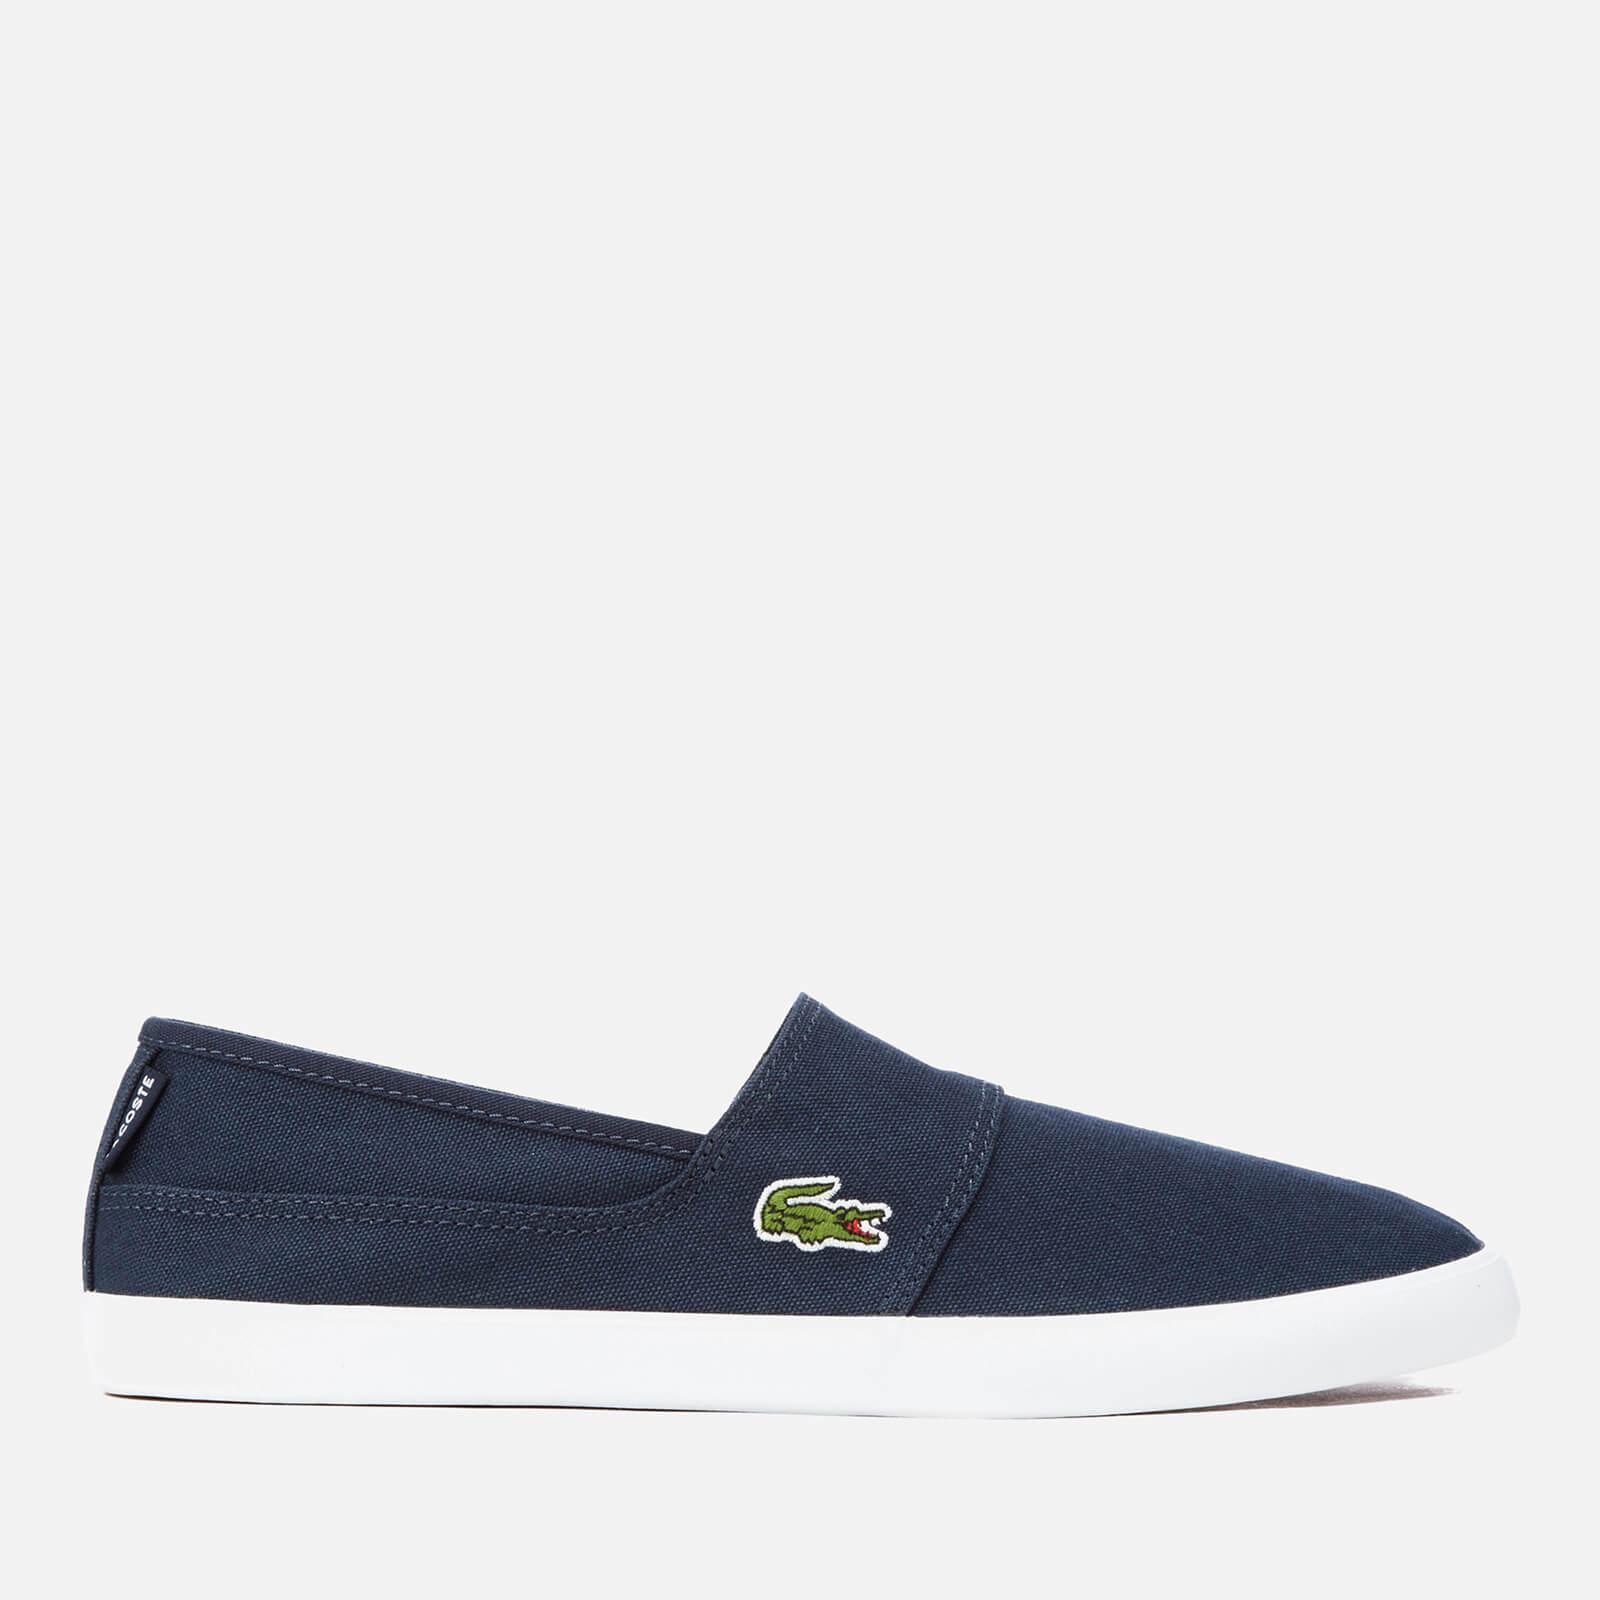 Lacoste Marice Canvas Loafer in Navy (Blue) for Men - Lyst